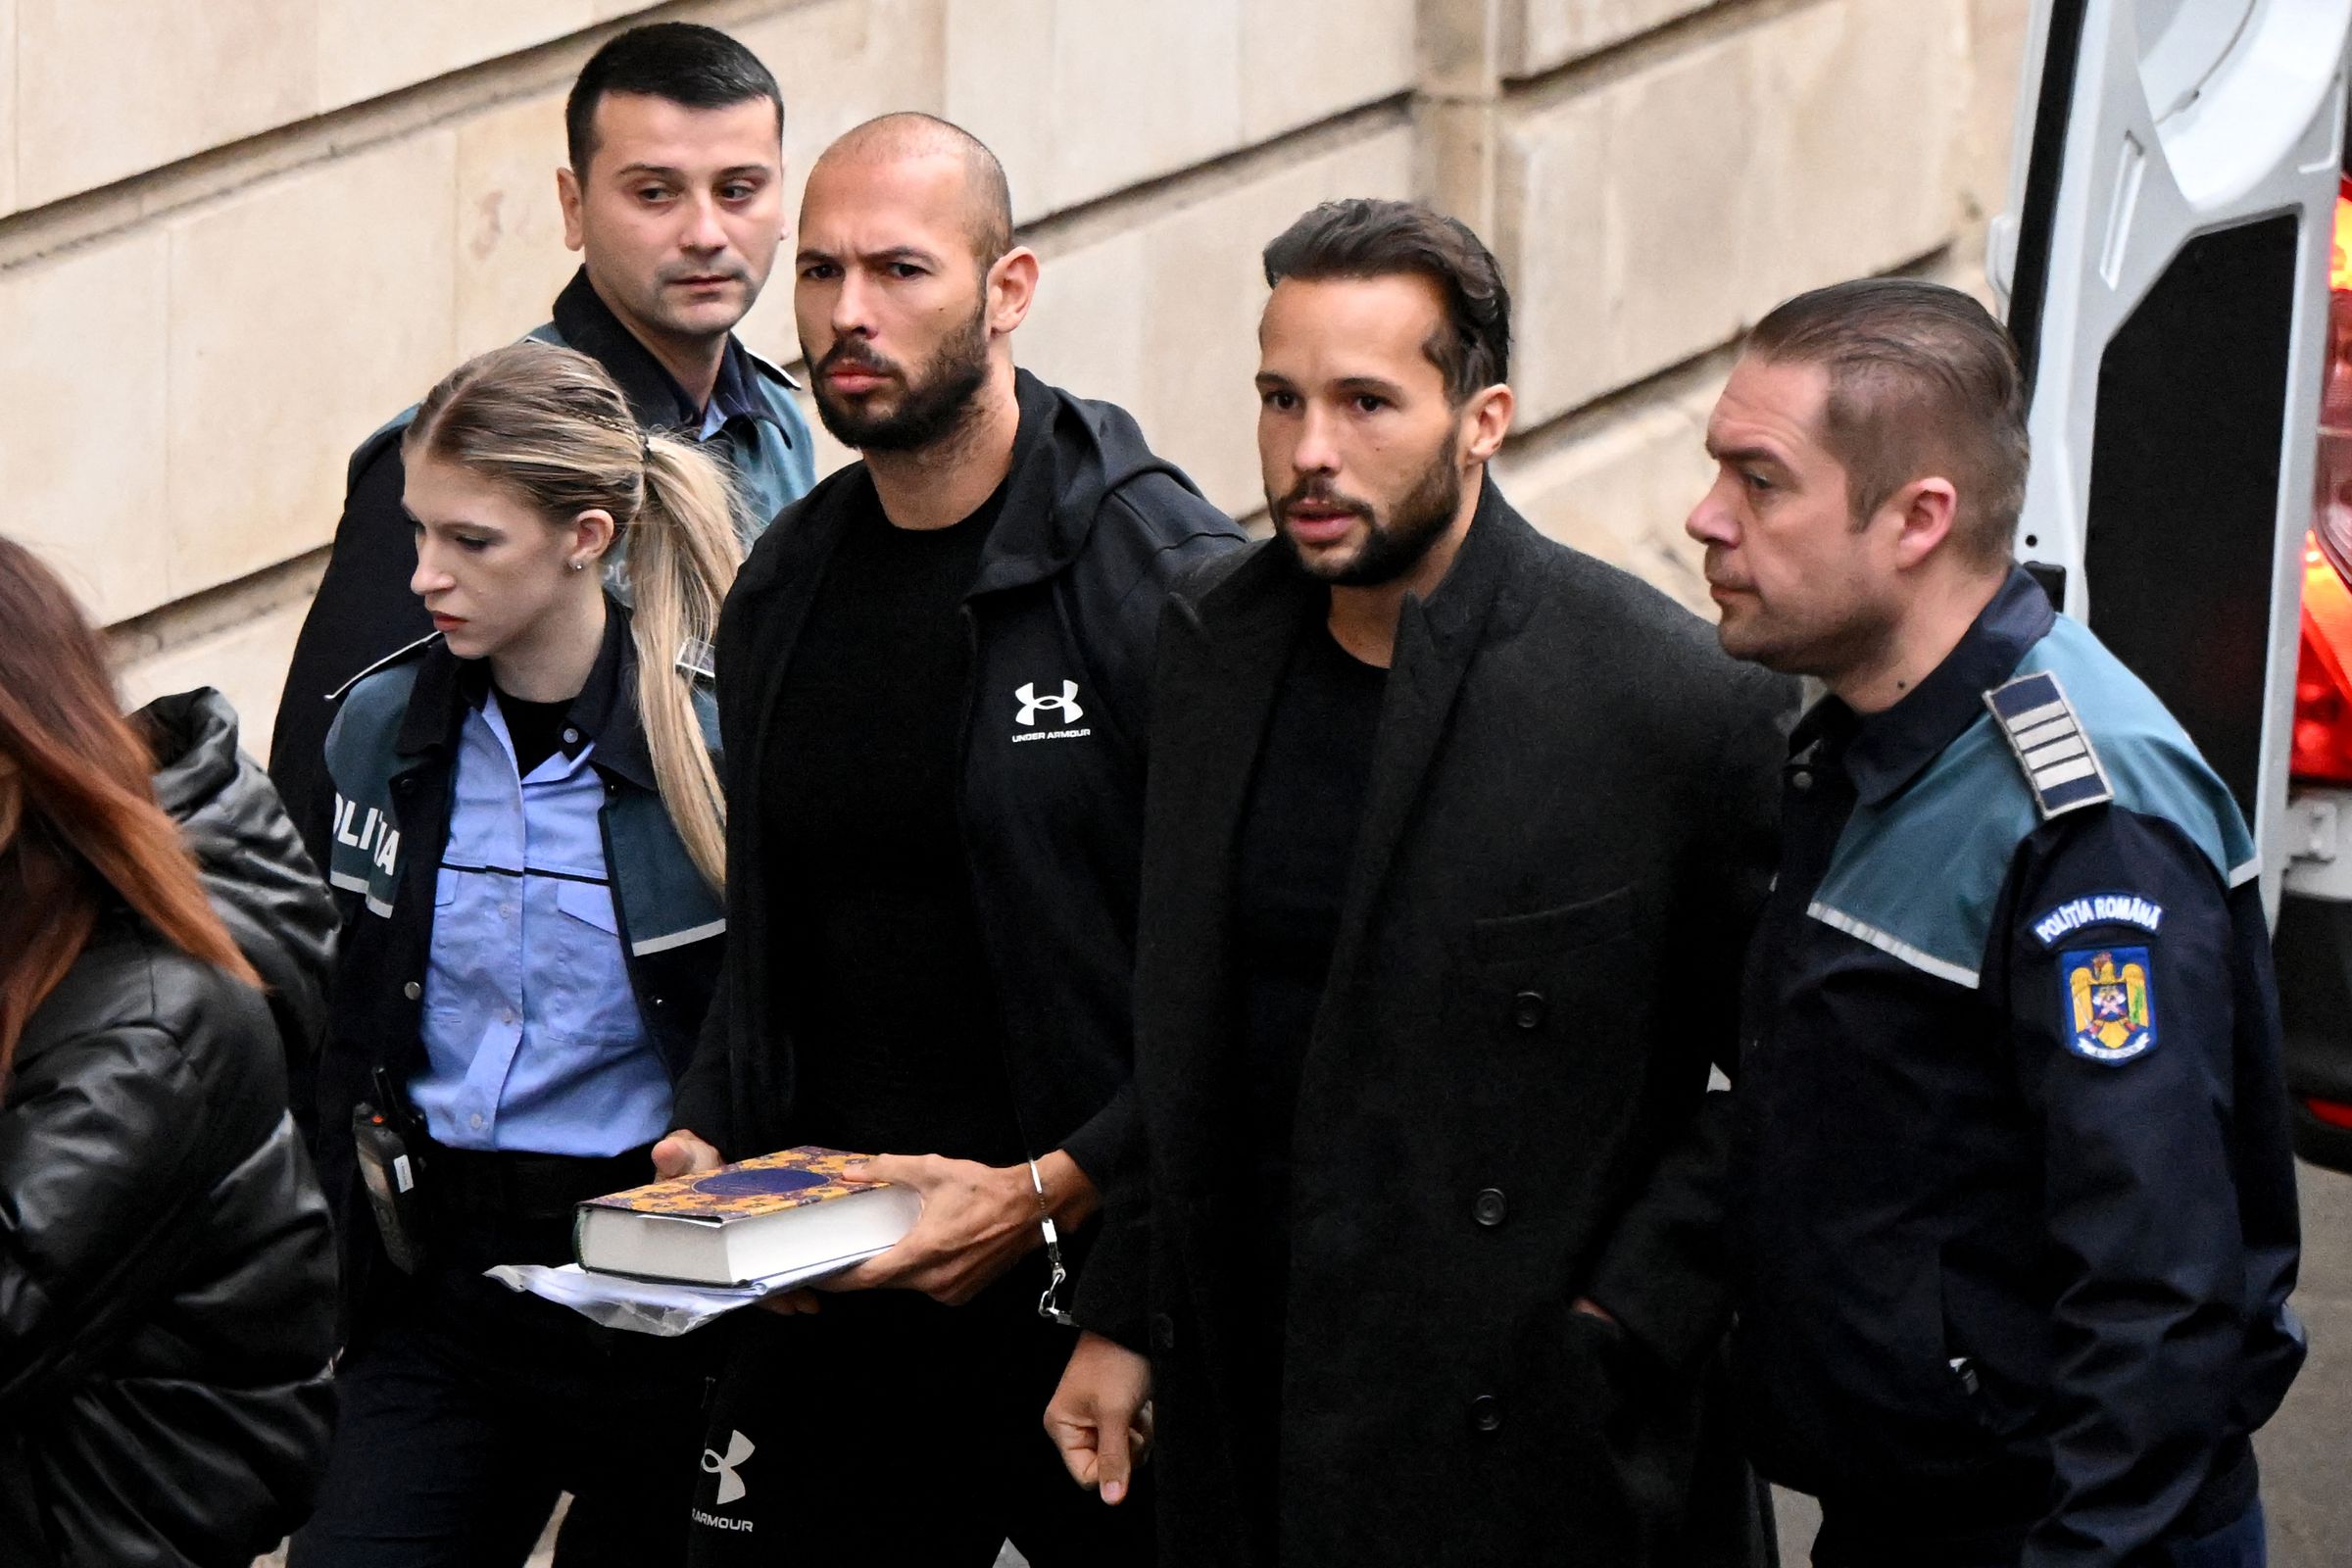 Andrew Tate (3rd R) and his brother Tristan Tate (2nd R) escorted by police to a court hearing in Bucharest on January 10th, 2023 for their appeal against pre-trial detention for alleged human trafficking, rape, and forming a criminal group.